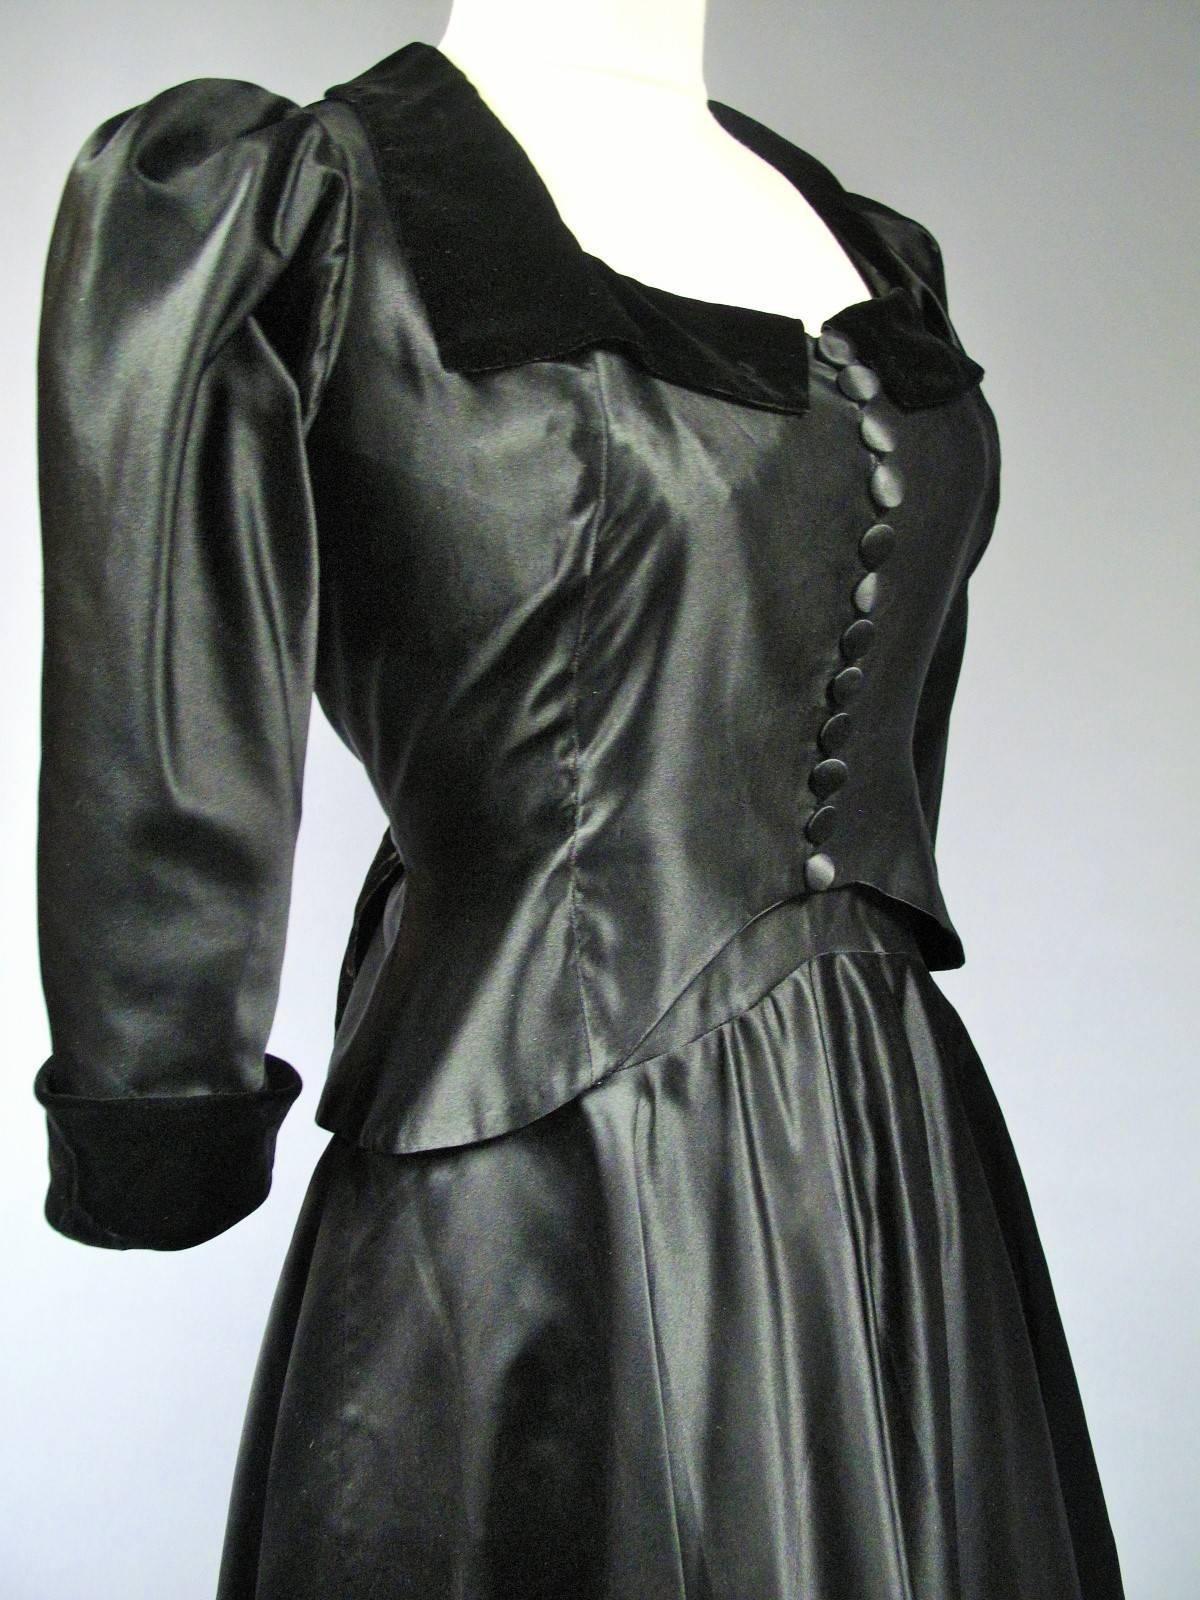 Circa 1935
France Haute Couture
Evening Dress Haute Couture Maggy Rouff in black satin and velvet from 1935. Jacket with round neck, collar and lapels of black velvet sleeves, puff sleeves and twelves buttons on the front. The bodice tightens with